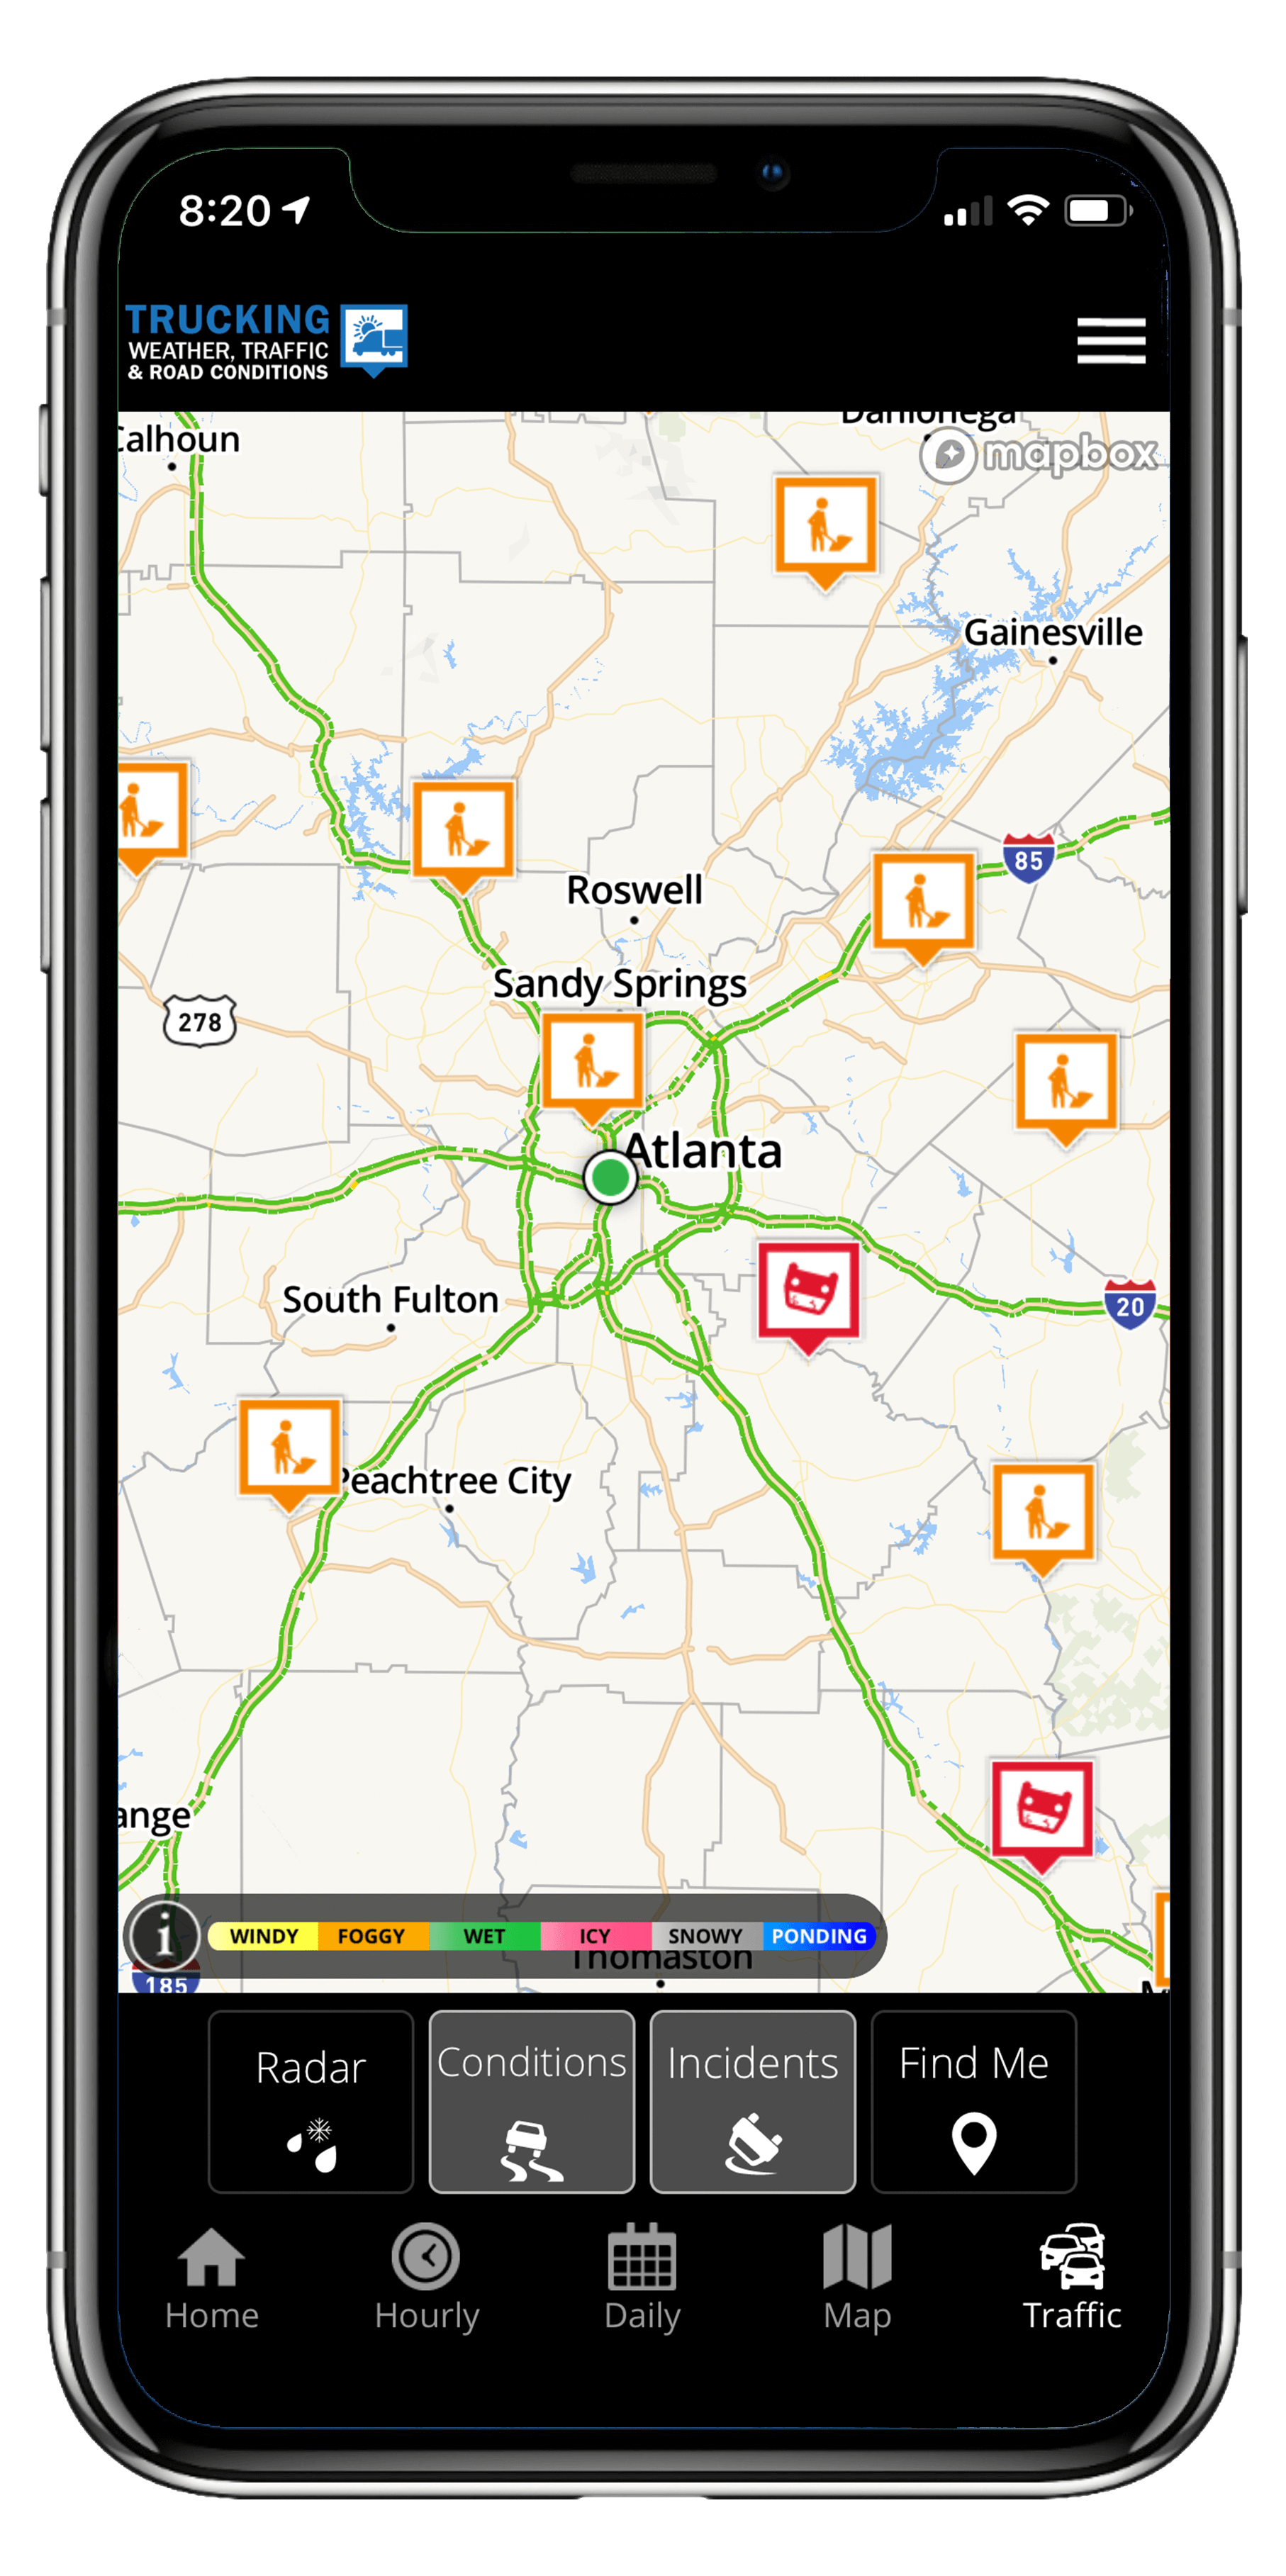 truck-weather_app-traffic.png